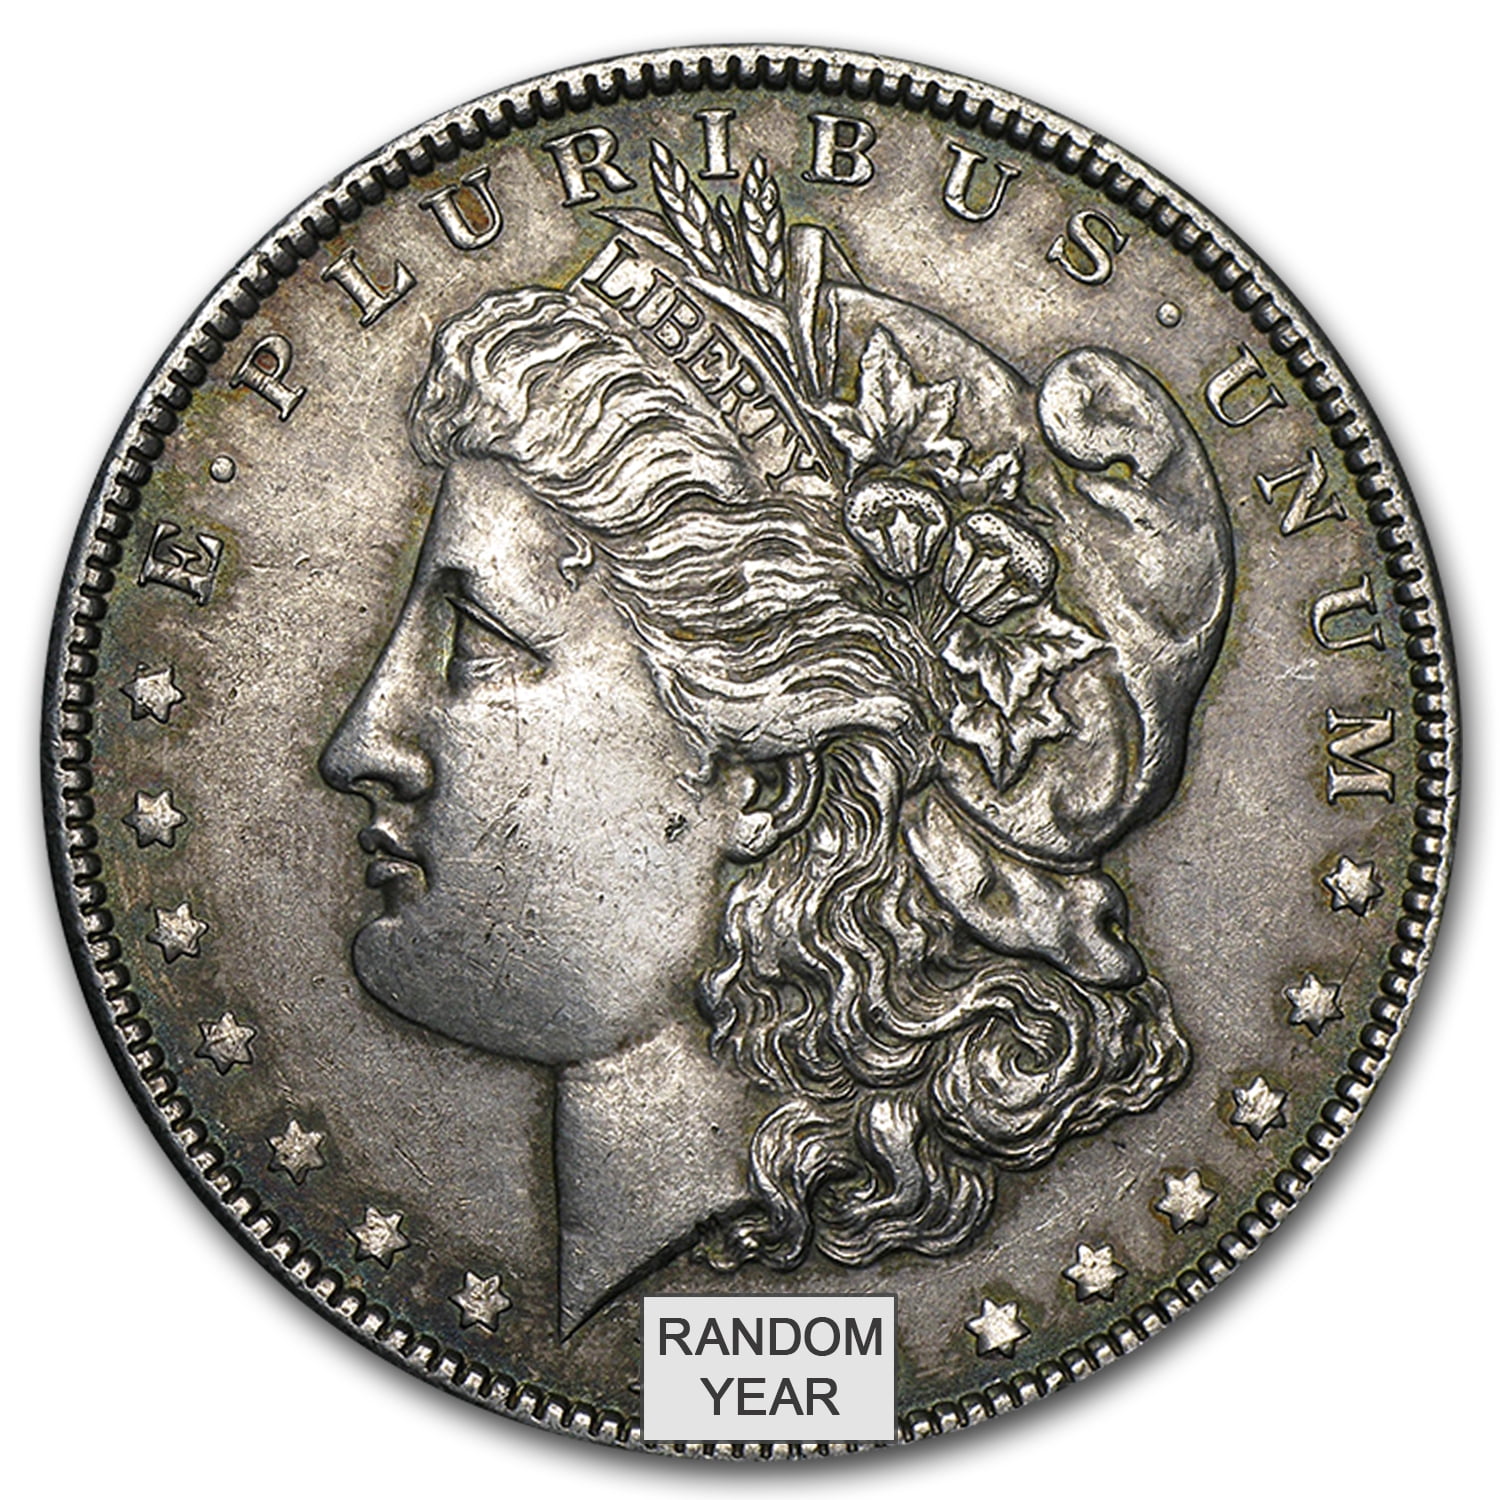 Silver Dollars - Liberty Coin & Currency